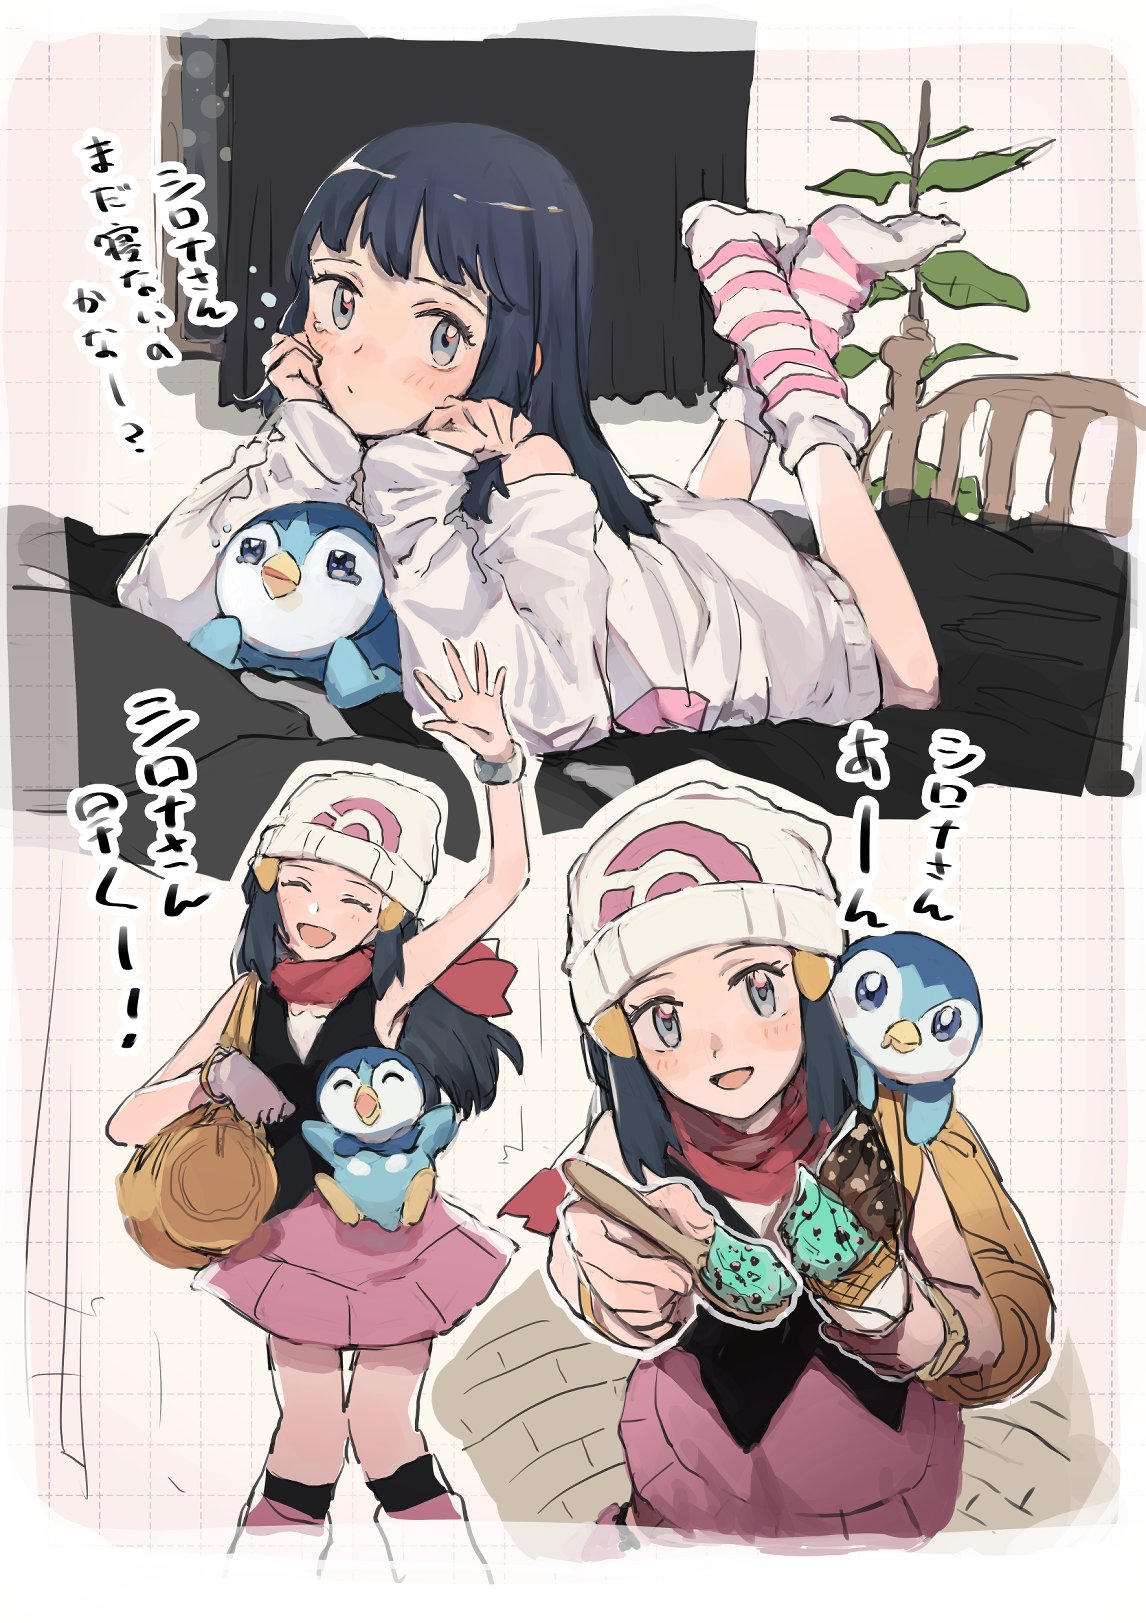 1girl bag beanie blue_eyes blue_hair blush chikiso commentary_request dawn_(pokemon) duffel_bag eyelashes floating_scarf food hair_ornament hairclip hat highres holding holding_food long_hair multiple_views on_shoulder open_mouth pink_footwear pink_skirt piplup poke_ball_print poke_ball_symbol pokemon pokemon_(anime) pokemon_(creature) pokemon_dppt pokemon_dppt_(anime) pokemon_on_shoulder pokemon_platinum poketch red_scarf scarf shirt skirt sleeveless smile socks watch white_headwear wristwatch